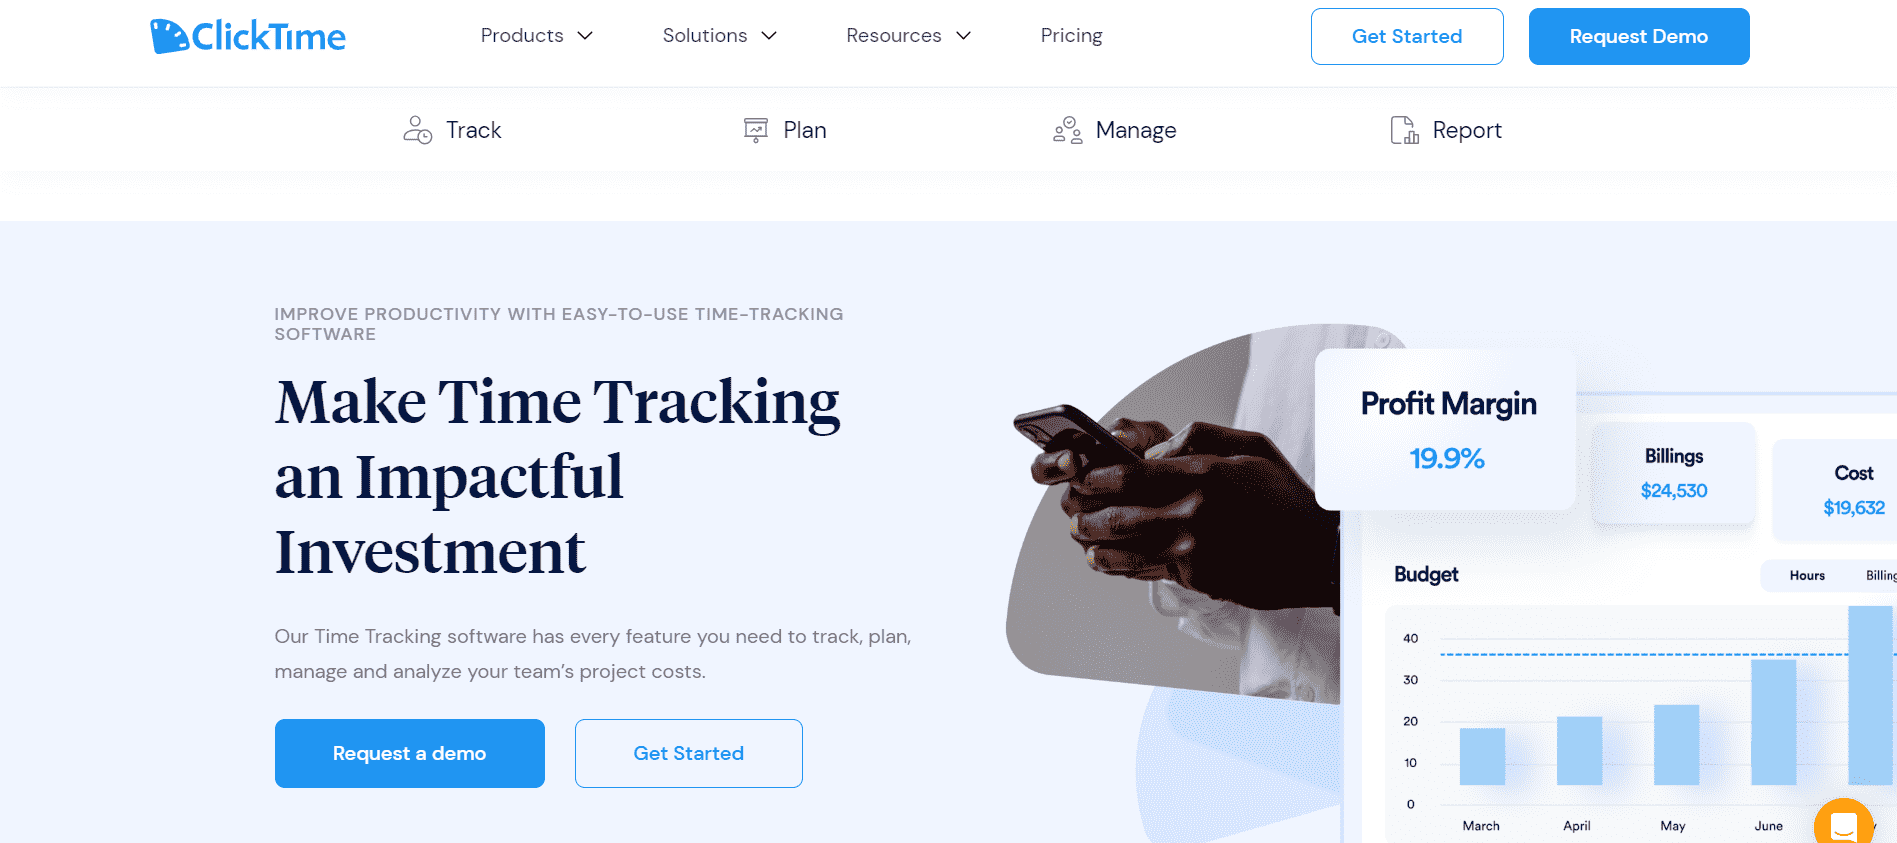 Homepage of 'ClickTime' one of the best small business time tracking software mentioning "make time tracking an impactful investment".